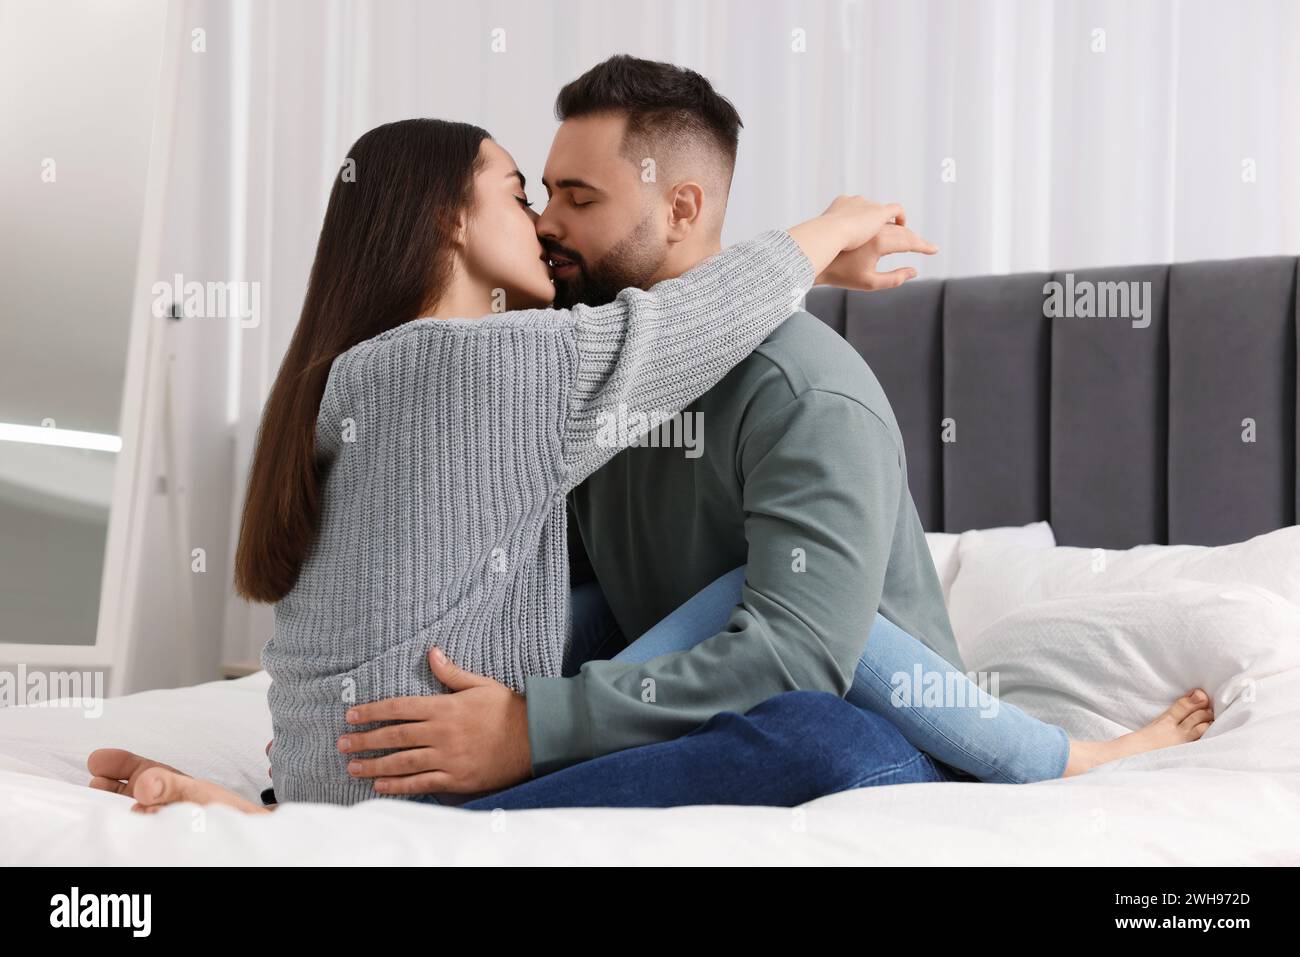 Cute relationship. Affectionate young couple kissing in bedroom Stock Photo